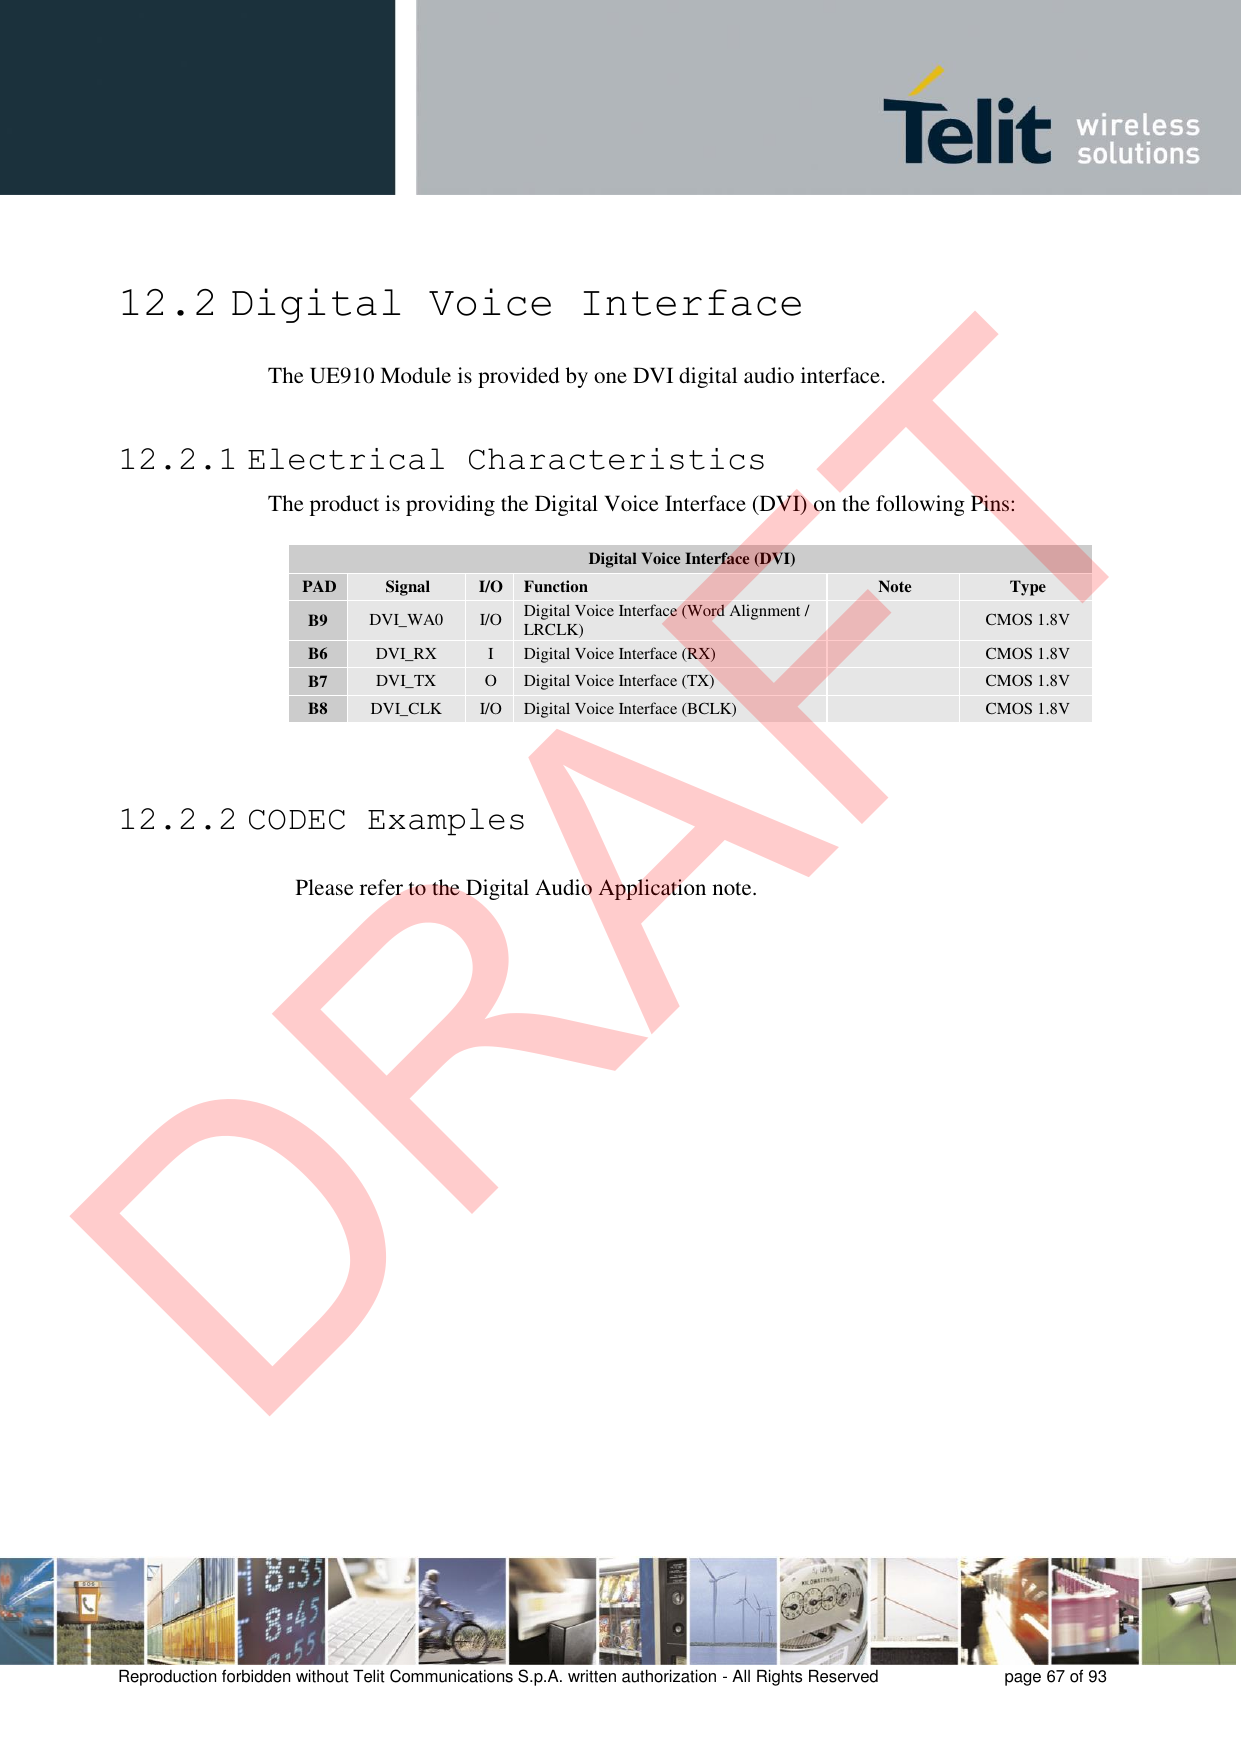 Reproduction forbidden without Telit Communications S.p.A. written authorization - All Rights Reserved  page 67 of 93 12.2 Digital Voice Interface The UE910 Module is provided by one DVI digital audio interface. 12.2.1 Electrical Characteristics The product is providing the Digital Voice Interface (DVI) on the following Pins: Digital Voice Interface (DVI) PAD Signal I/O Function Note Type B9 DVI_WA0 I/O Digital Voice Interface (Word Alignment / LRCLK) CMOS 1.8V B6 DVI_RX I Digital Voice Interface (RX) CMOS 1.8V B7 DVI_TX O Digital Voice Interface (TX) CMOS 1.8V B8 DVI_CLK I/O Digital Voice Interface (BCLK) CMOS 1.8V 12.2.2 CODEC Examples Please refer to the Digital Audio Application note. DRAFT